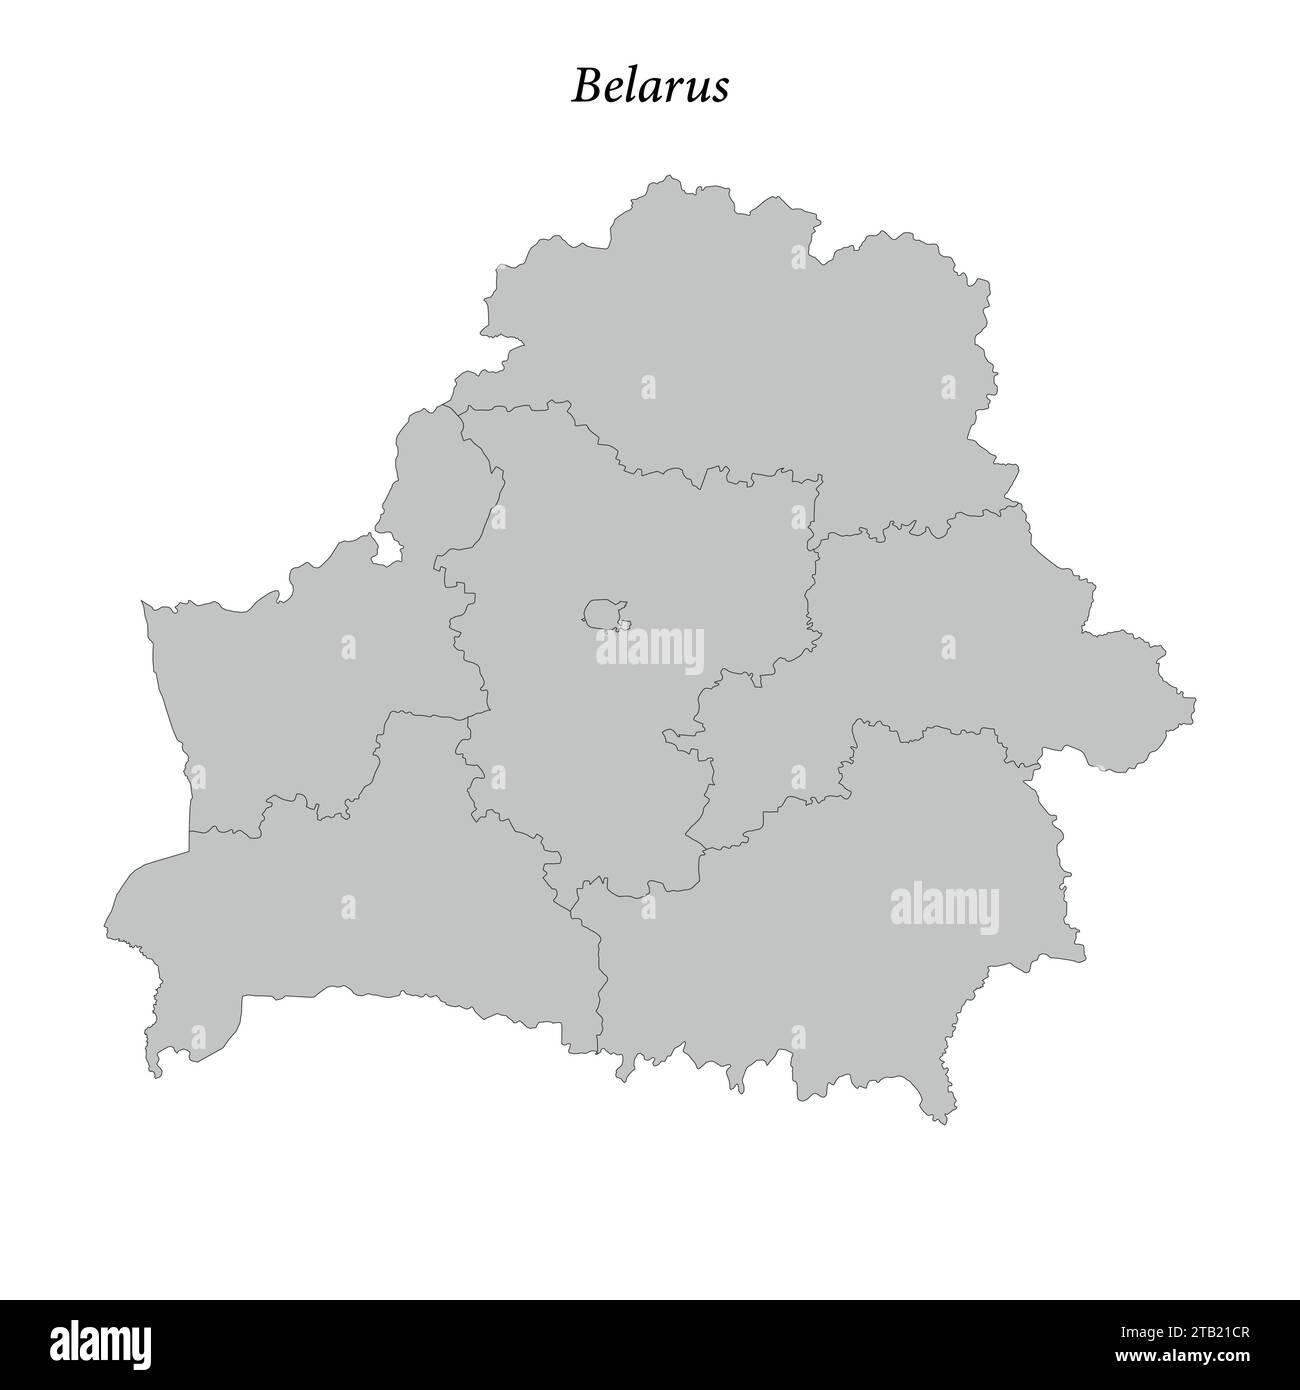 Simple flat Map of Belarus with district borders Stock Vector